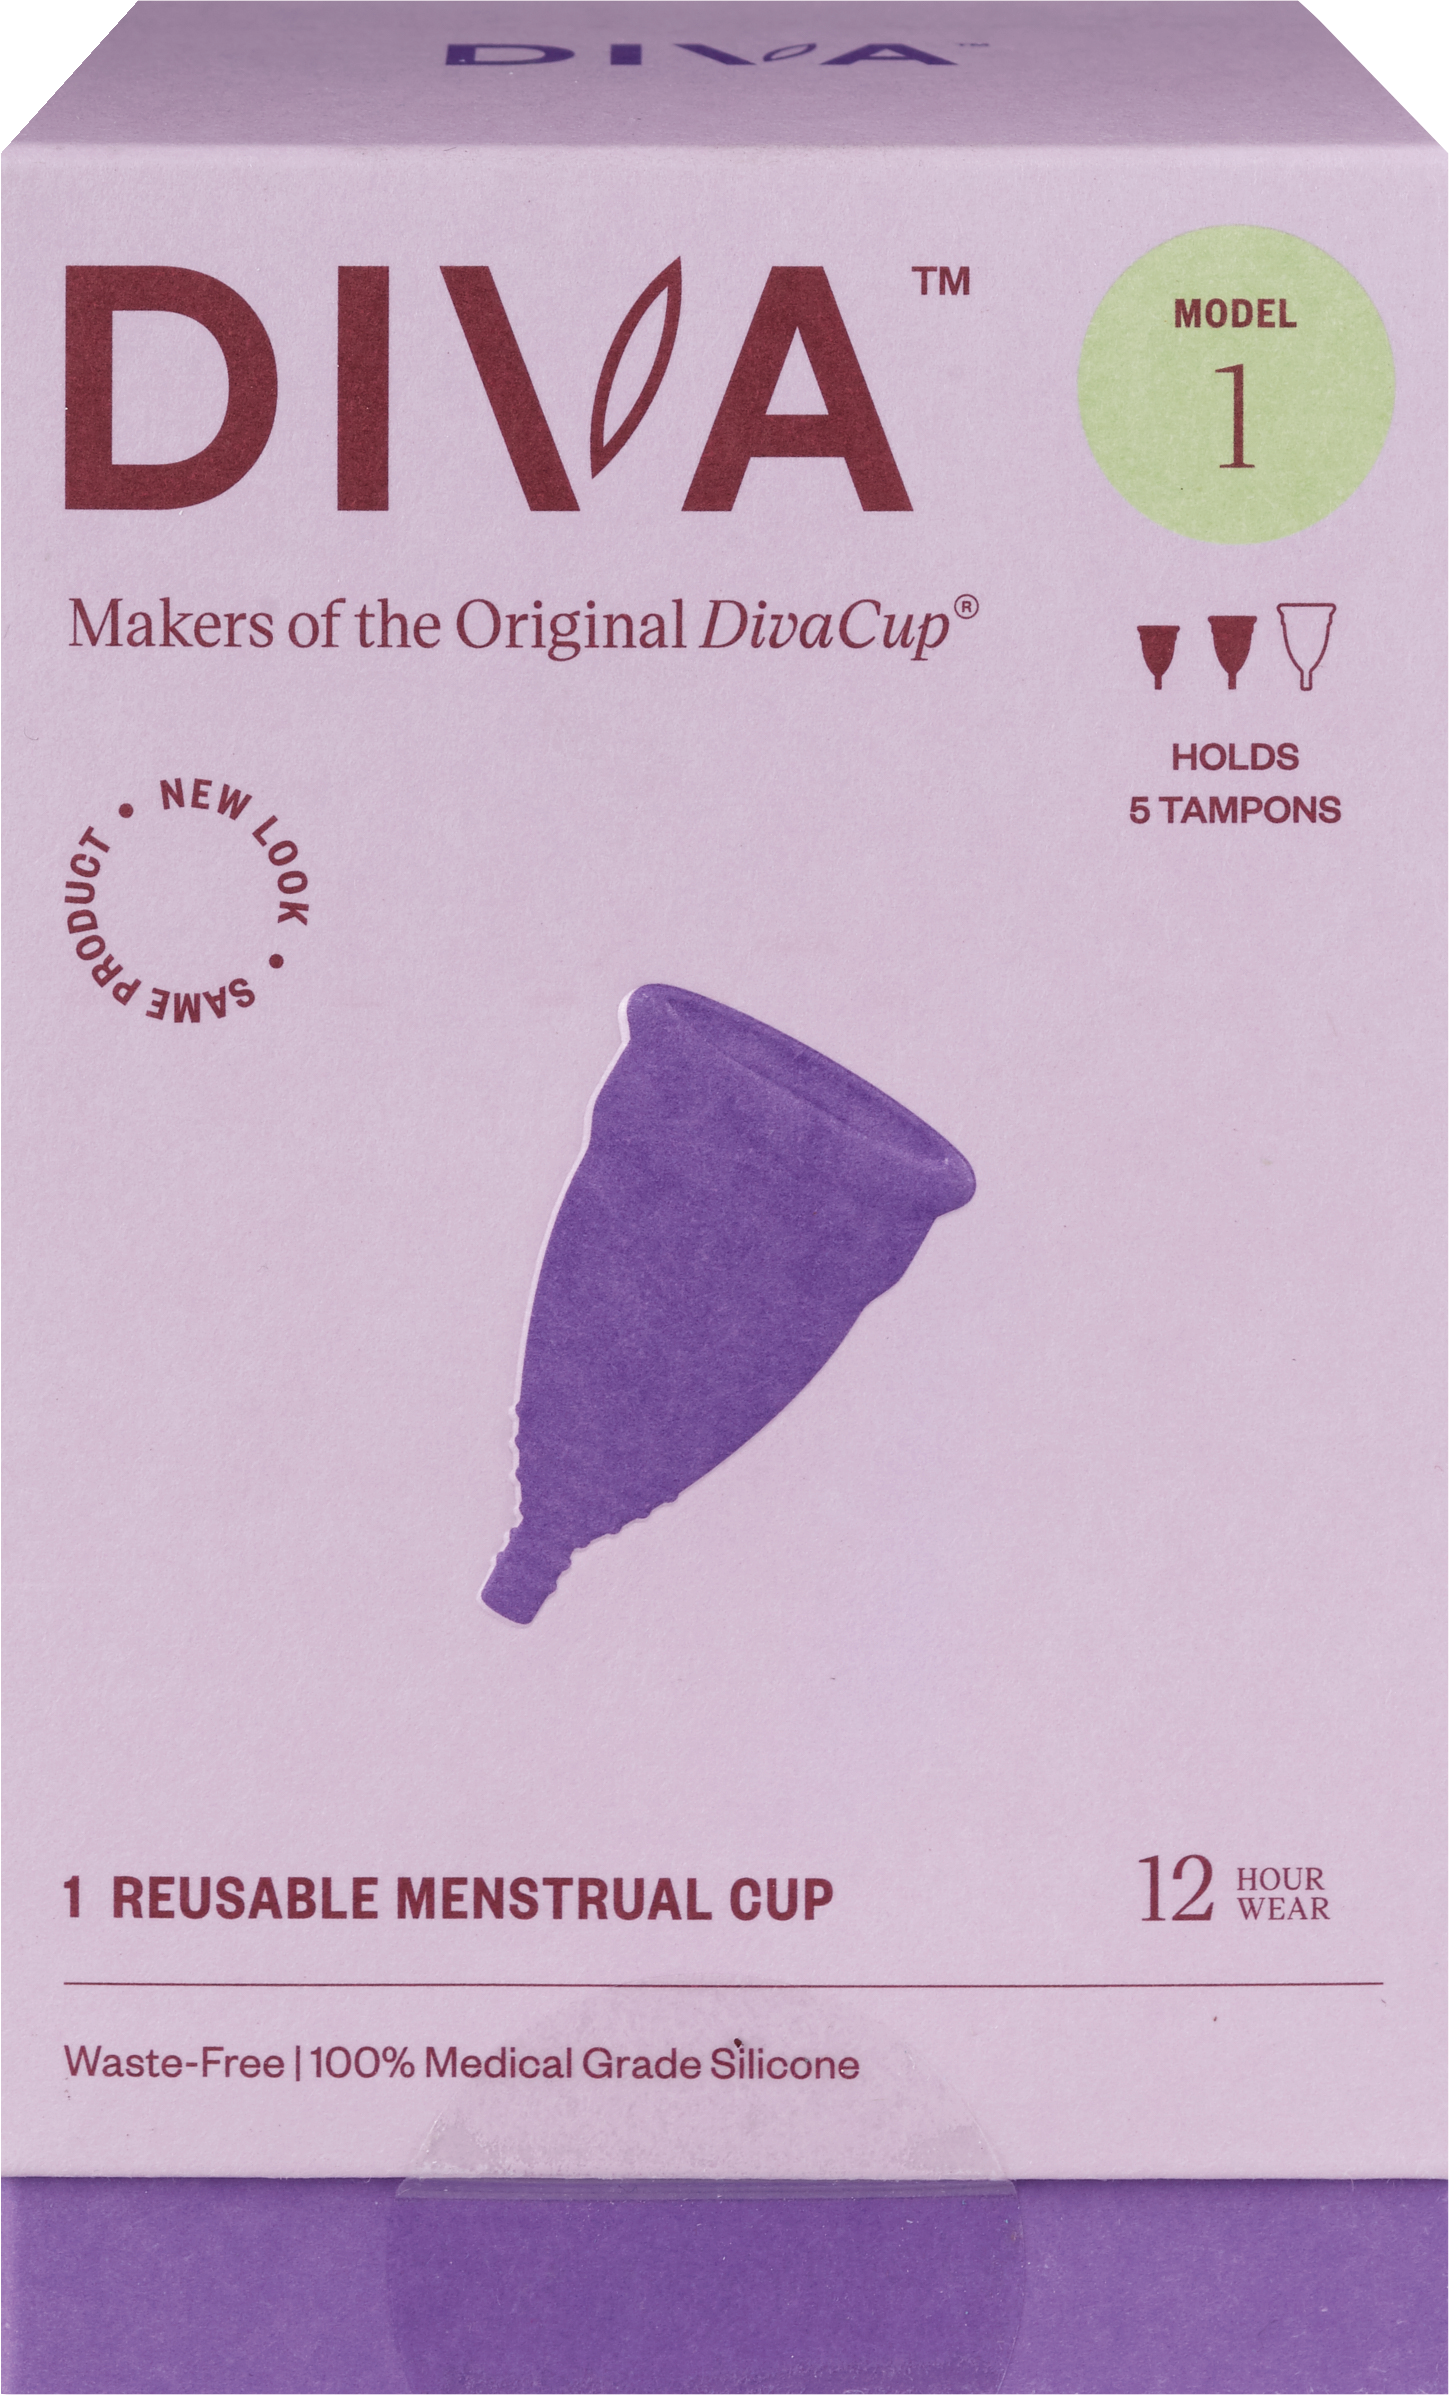 The DivaCup, Menstrual Cup